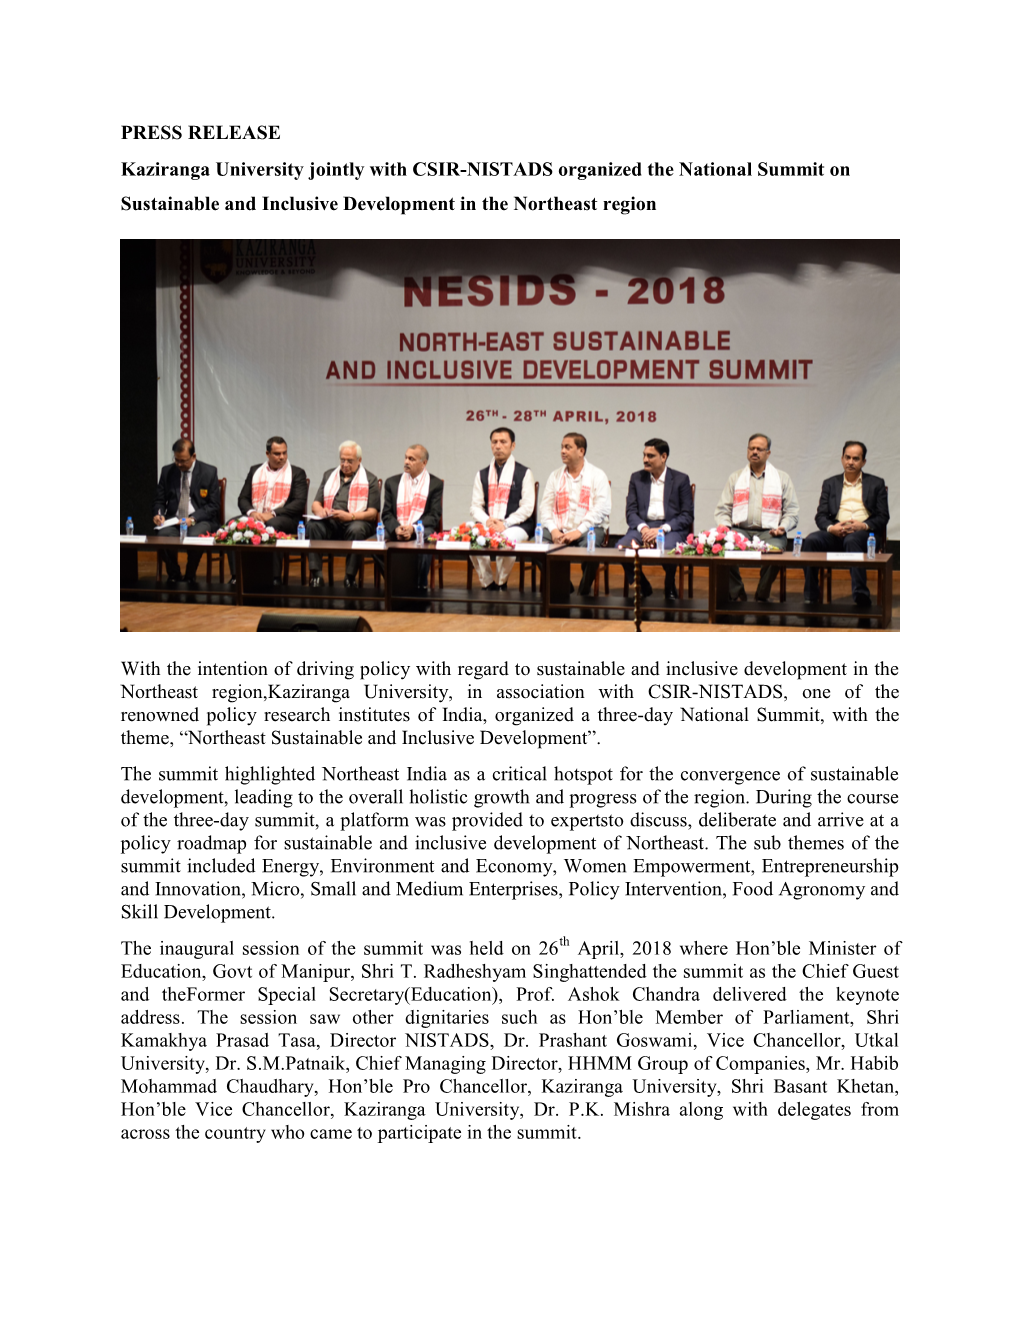 PRESS RELEASE Kaziranga University Jointly with CSIR-NISTADS Organized the National Summit on Sustainable and Inclusive Development in the Northeast Region